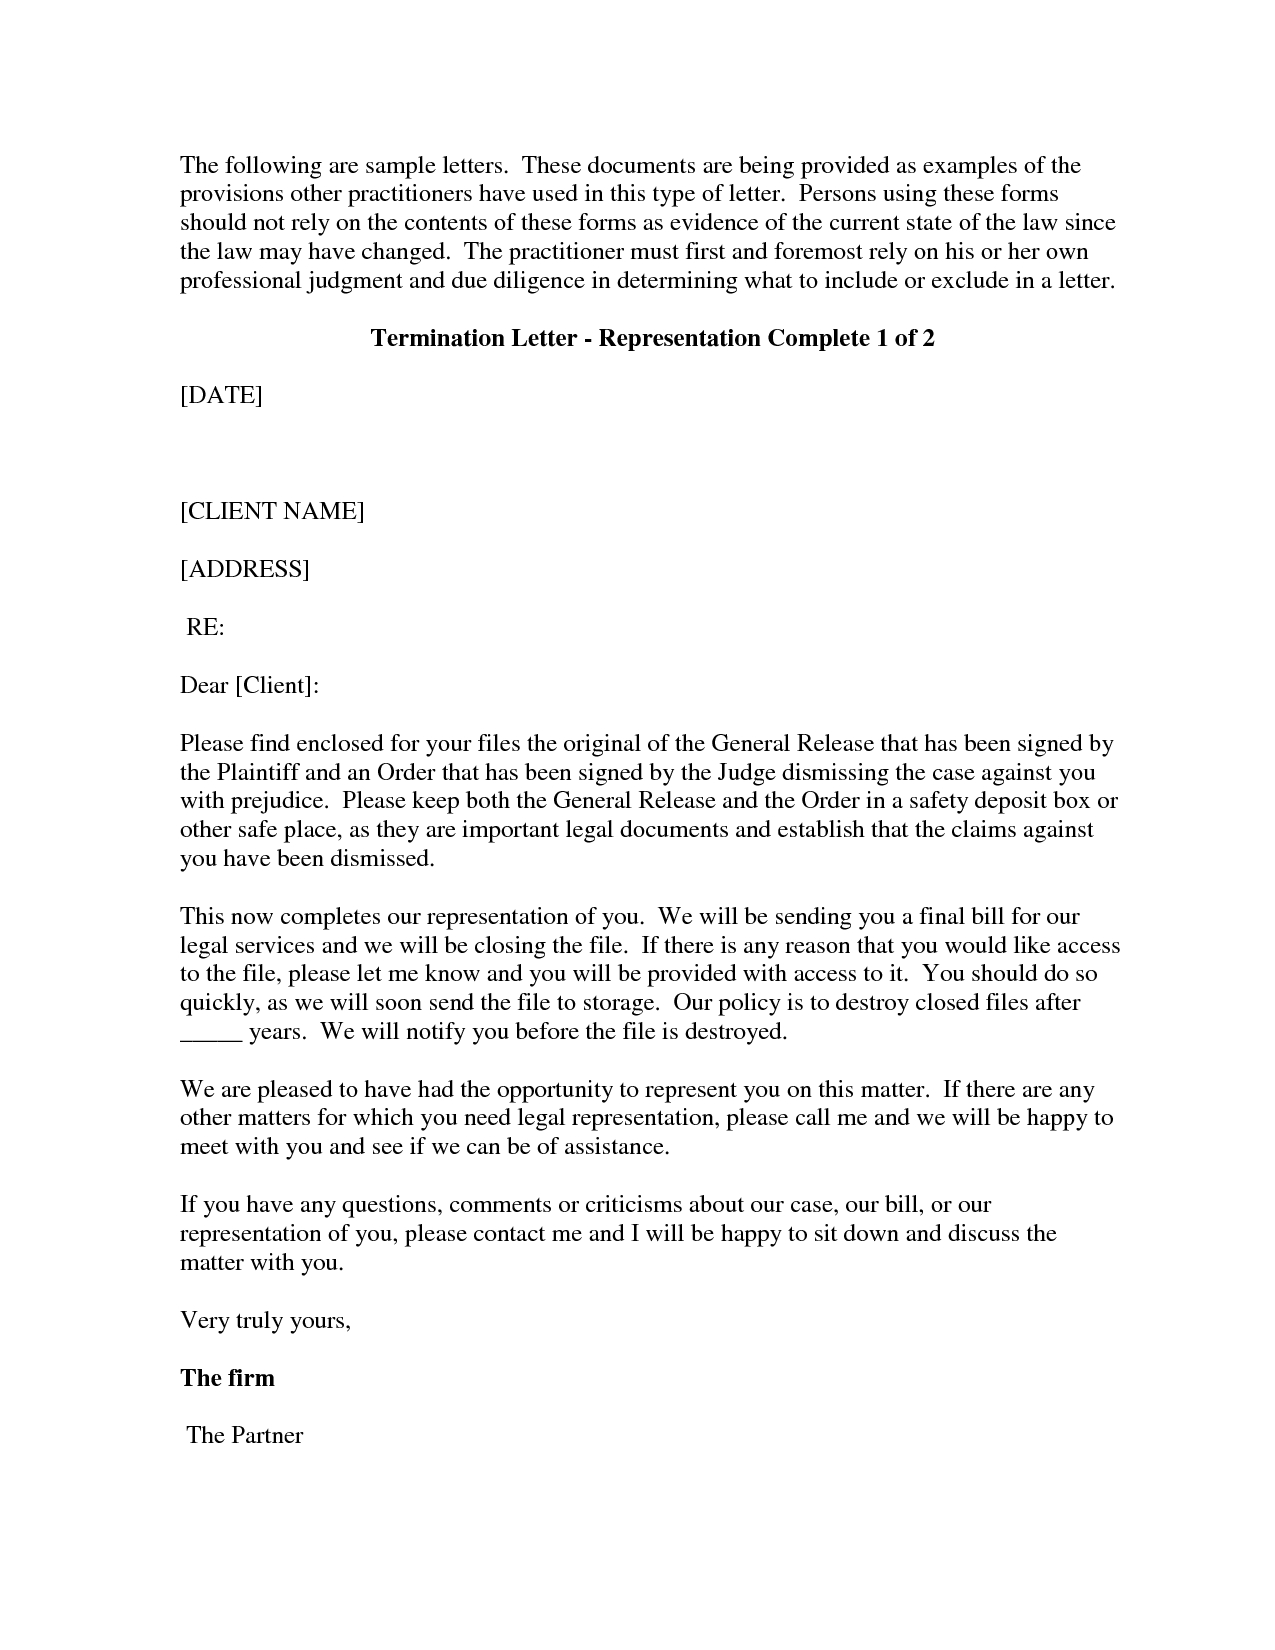 Attorney Termination Letter Template - Free Cover Letter Templates Sample attorney Termination Letter